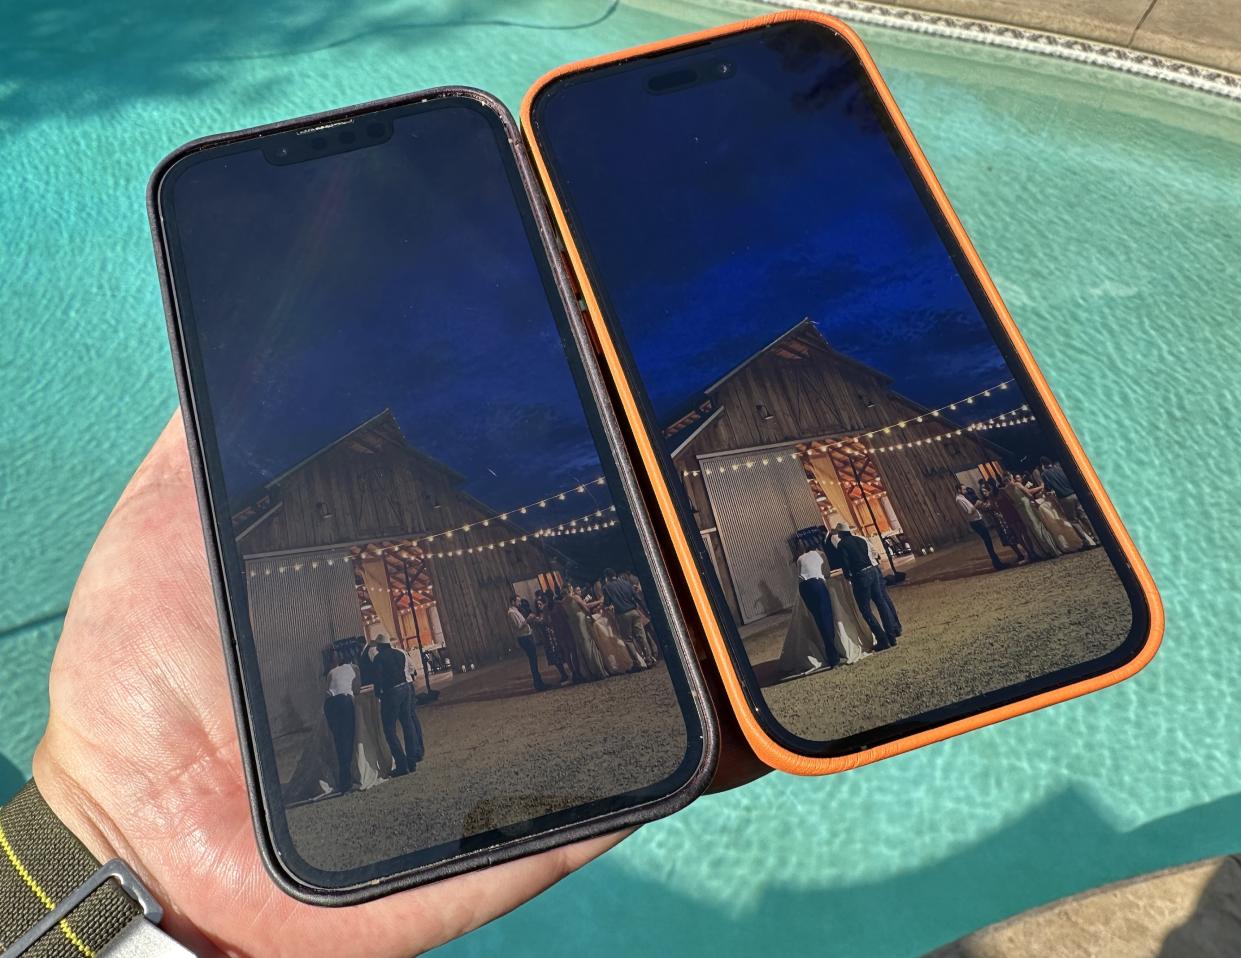 comparison shot of iPhone 13 pro and iPhone 14 Pro screen brightness in sunlight